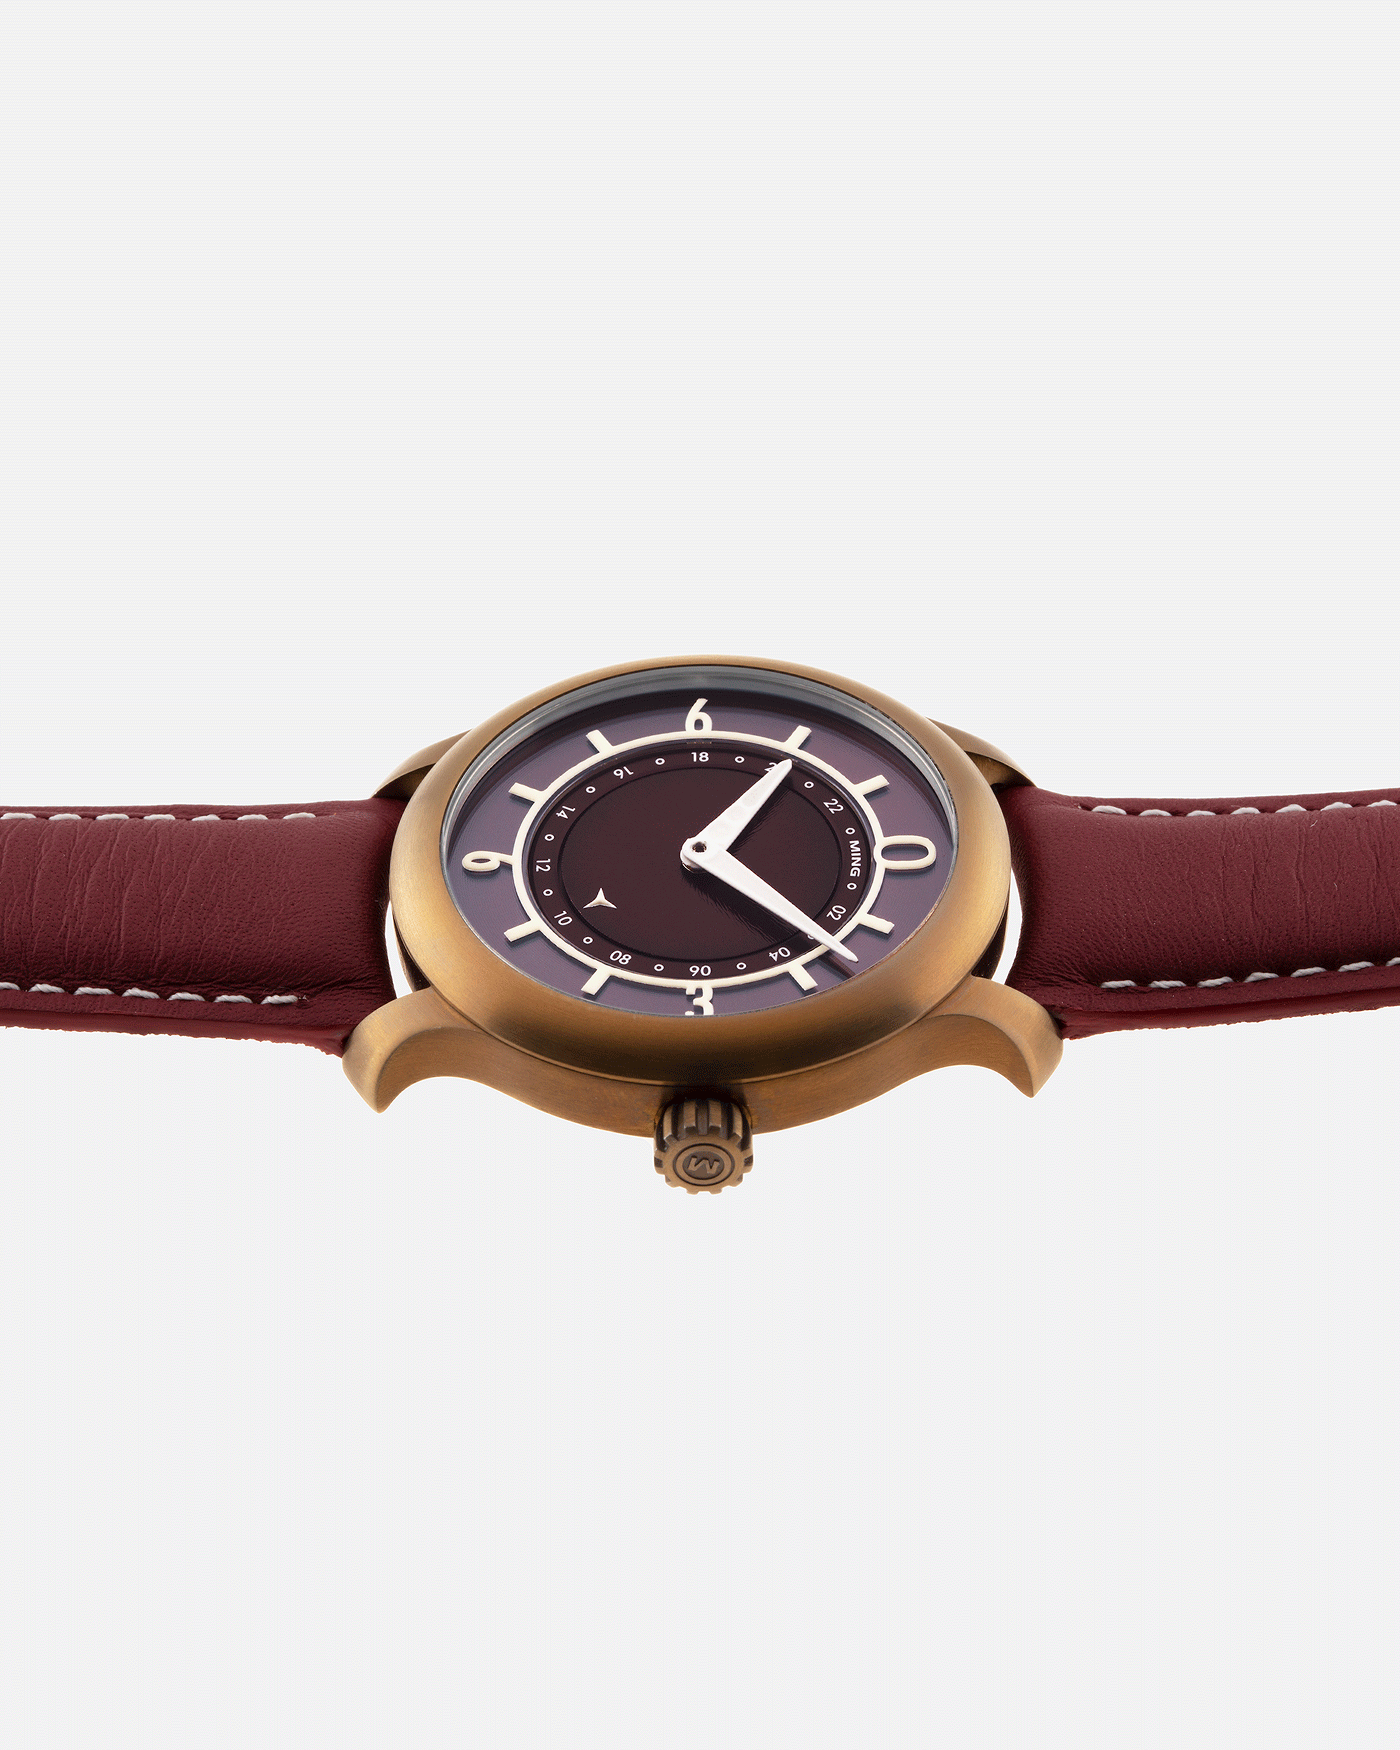 Brand: Ming Year: 2018 Model: 17.03 BB Edition Material: Anodised Grade 2 Titanium Movement: Self-Winding Sellita SW 330-1 Case Diameter: 38mm Strap: Ming Burgundy Smooth Calf by Jean Rousseau Paris and Matching Annodised Grade 2 Titanium Tang Buckle